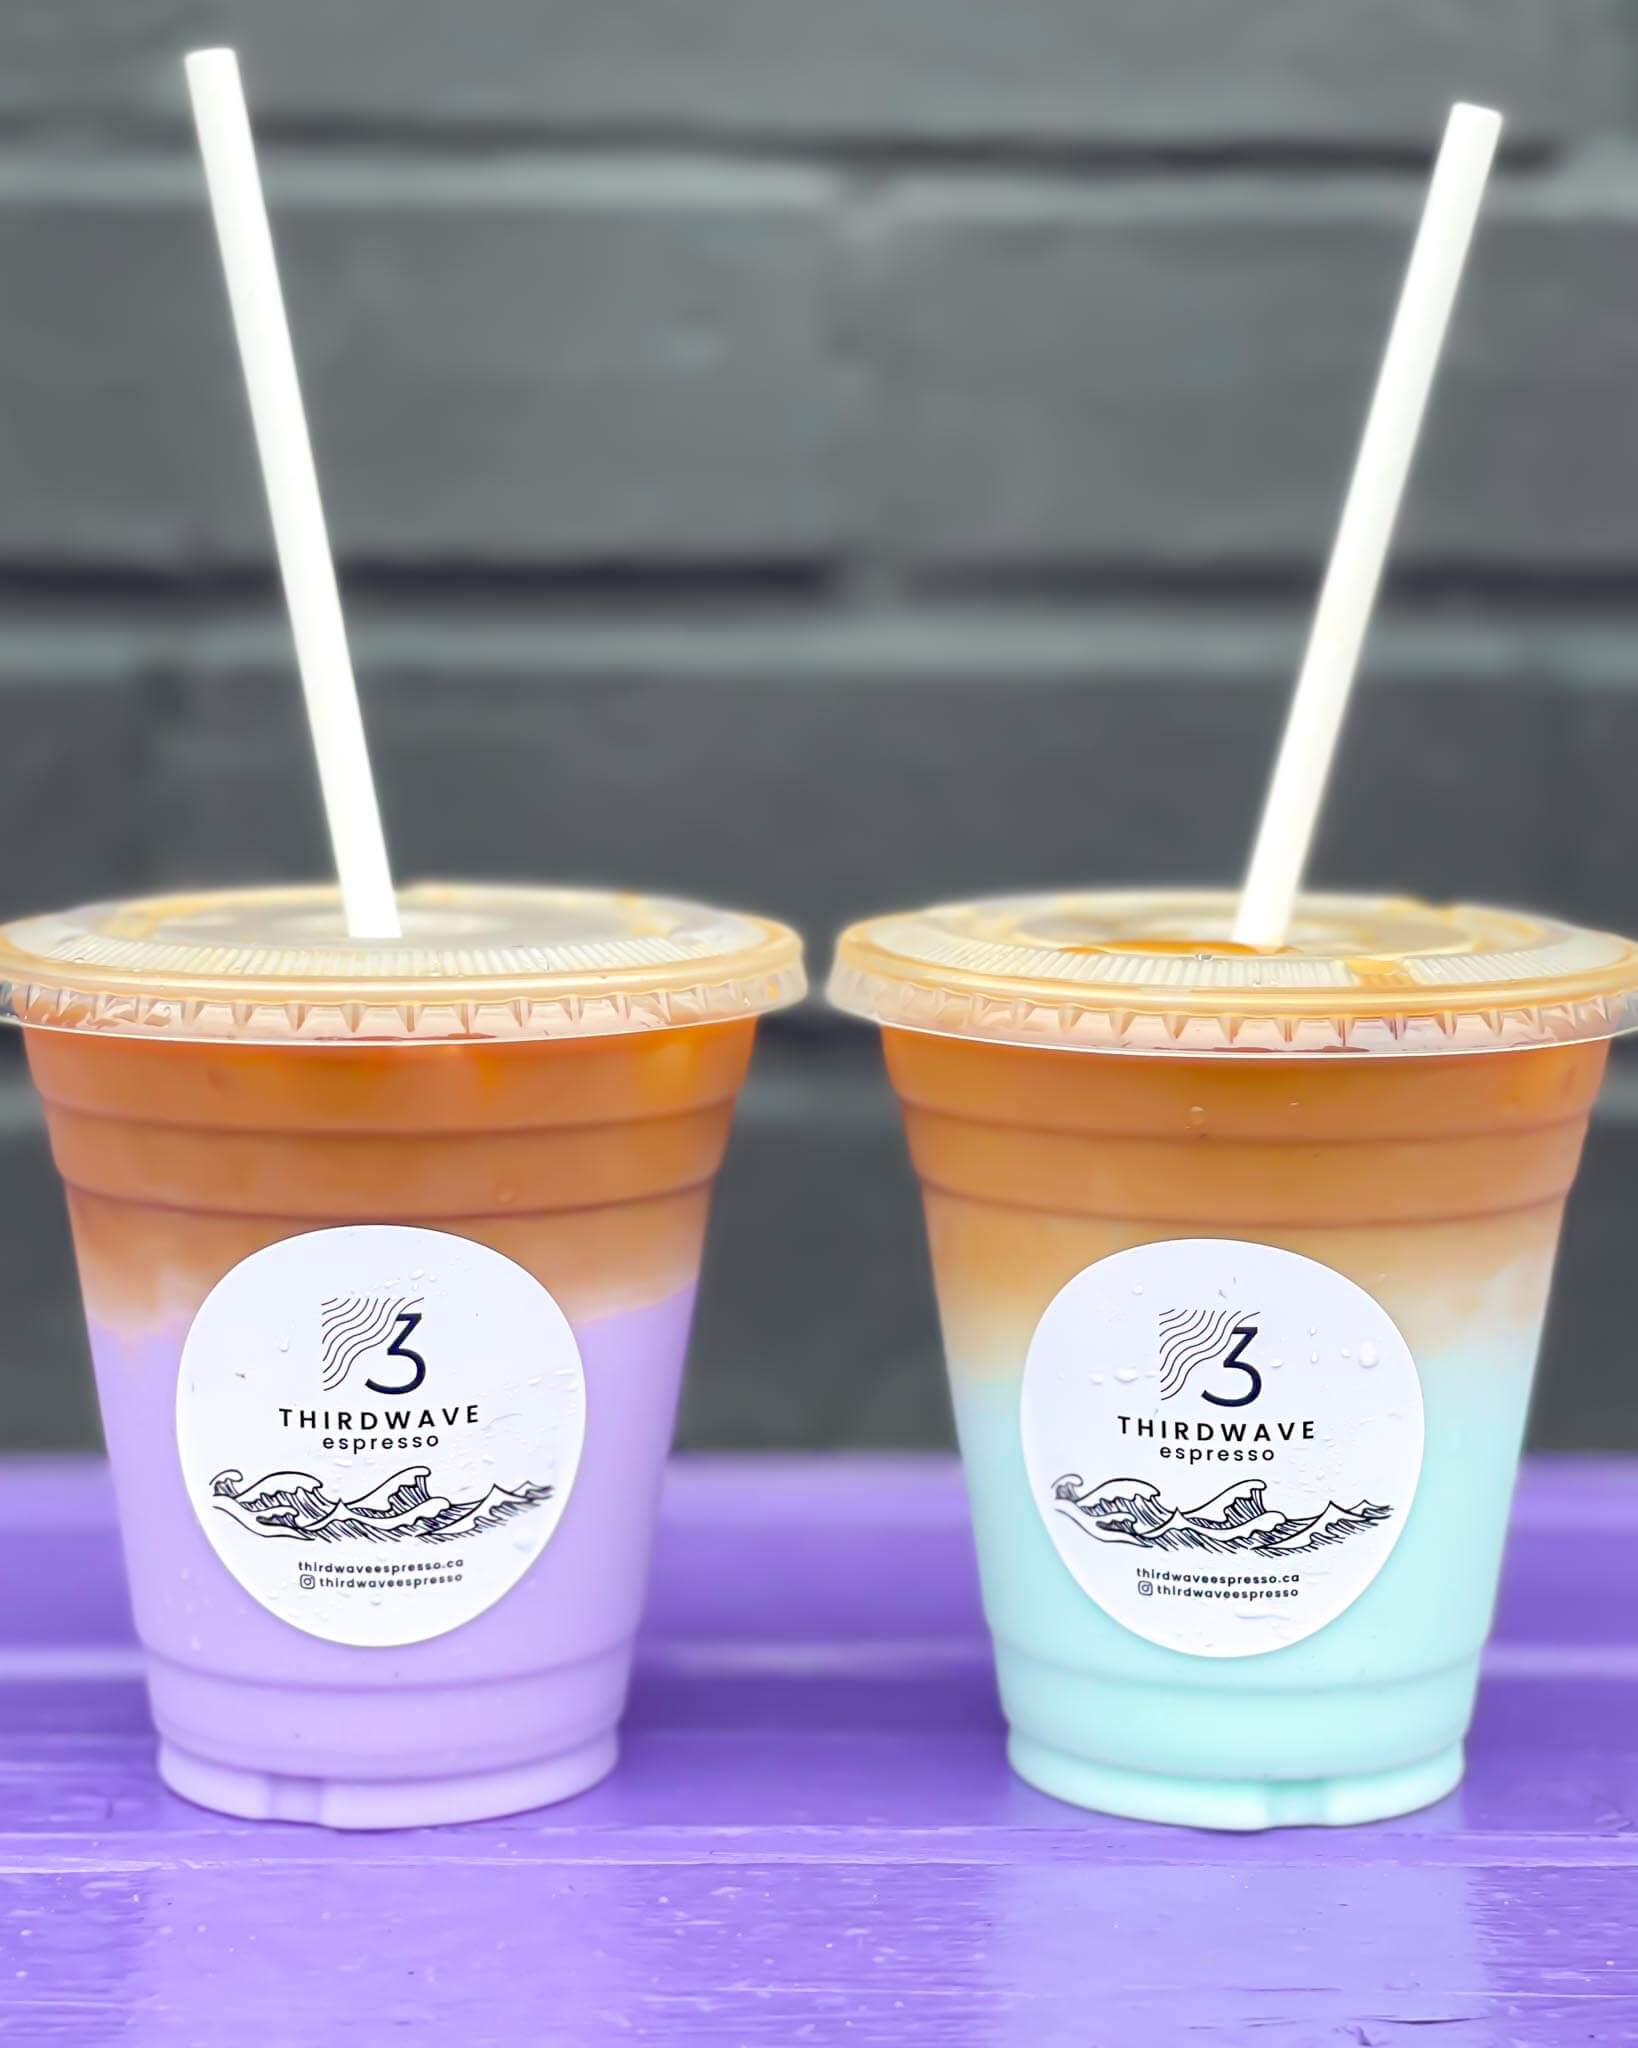 Third wave espresso purple and blue iced lattes